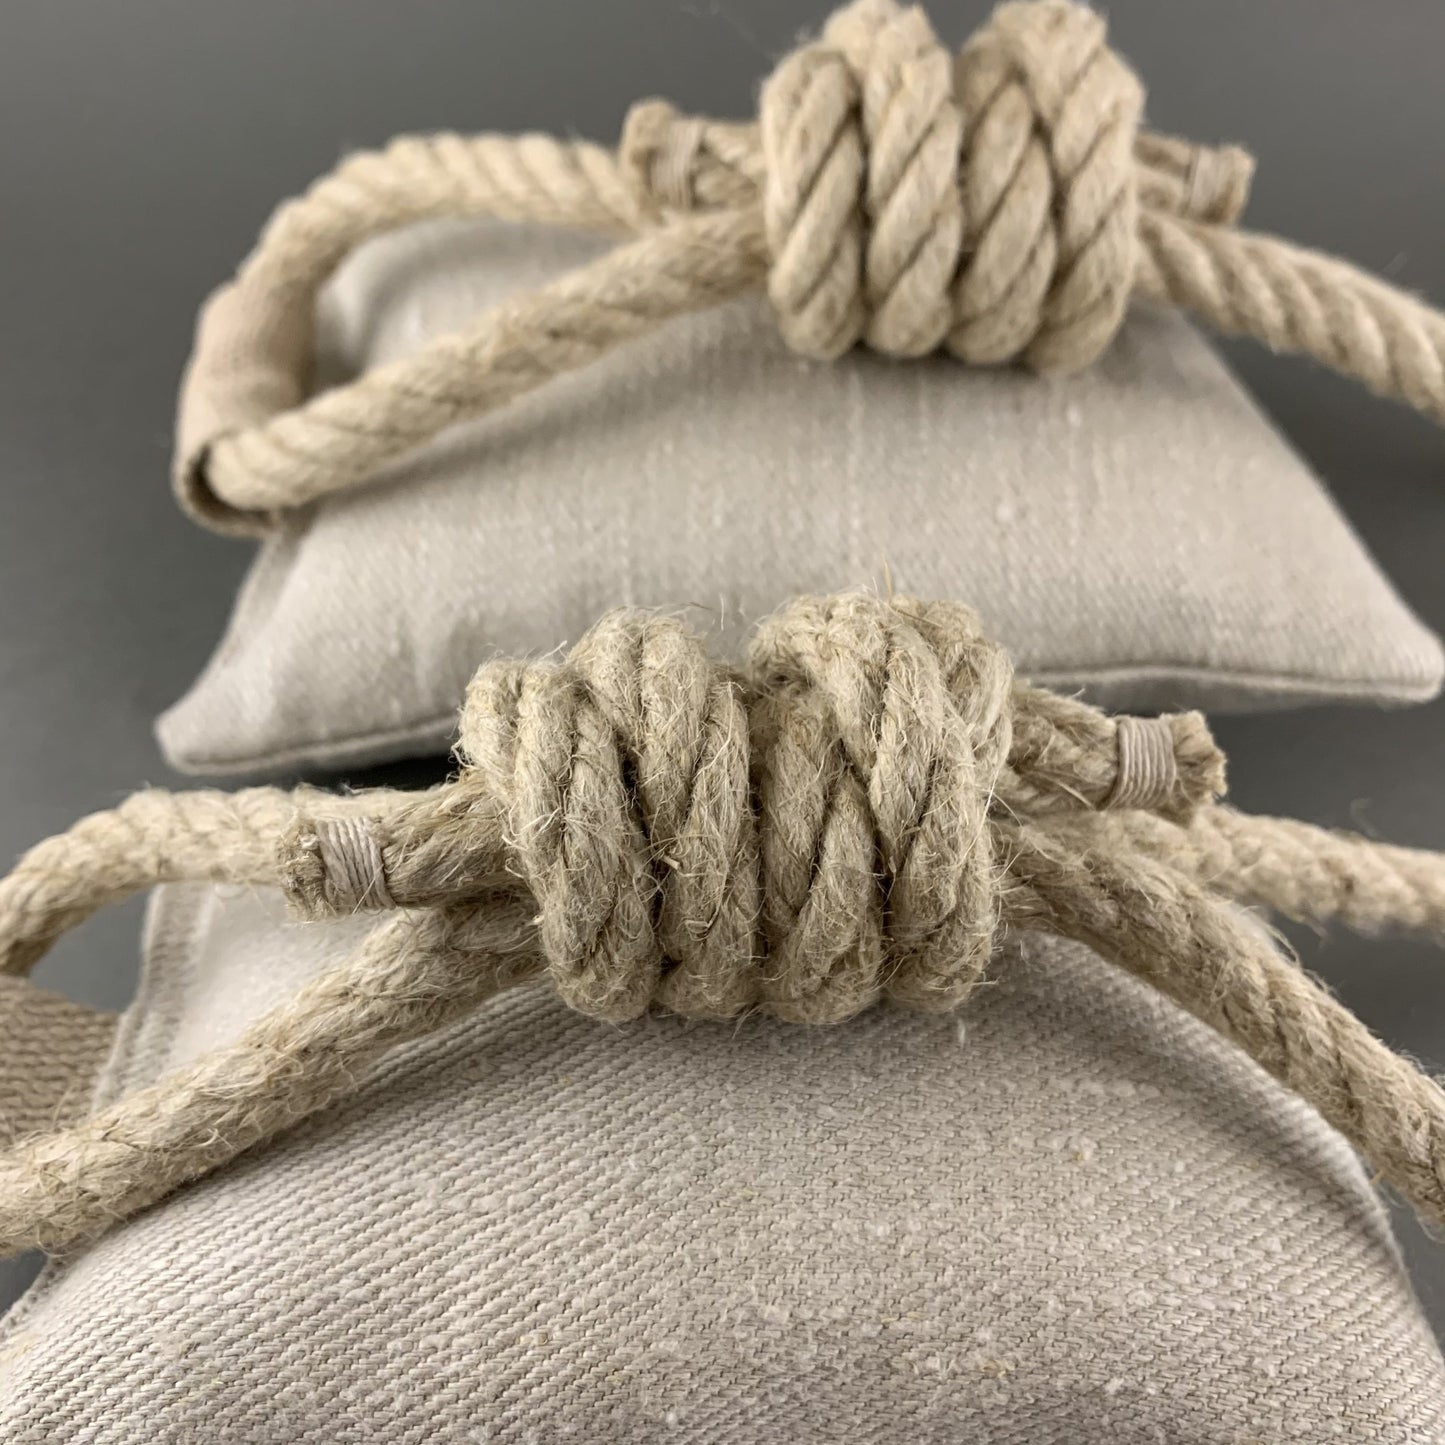 Orgnic Hemp and Wool dog toy